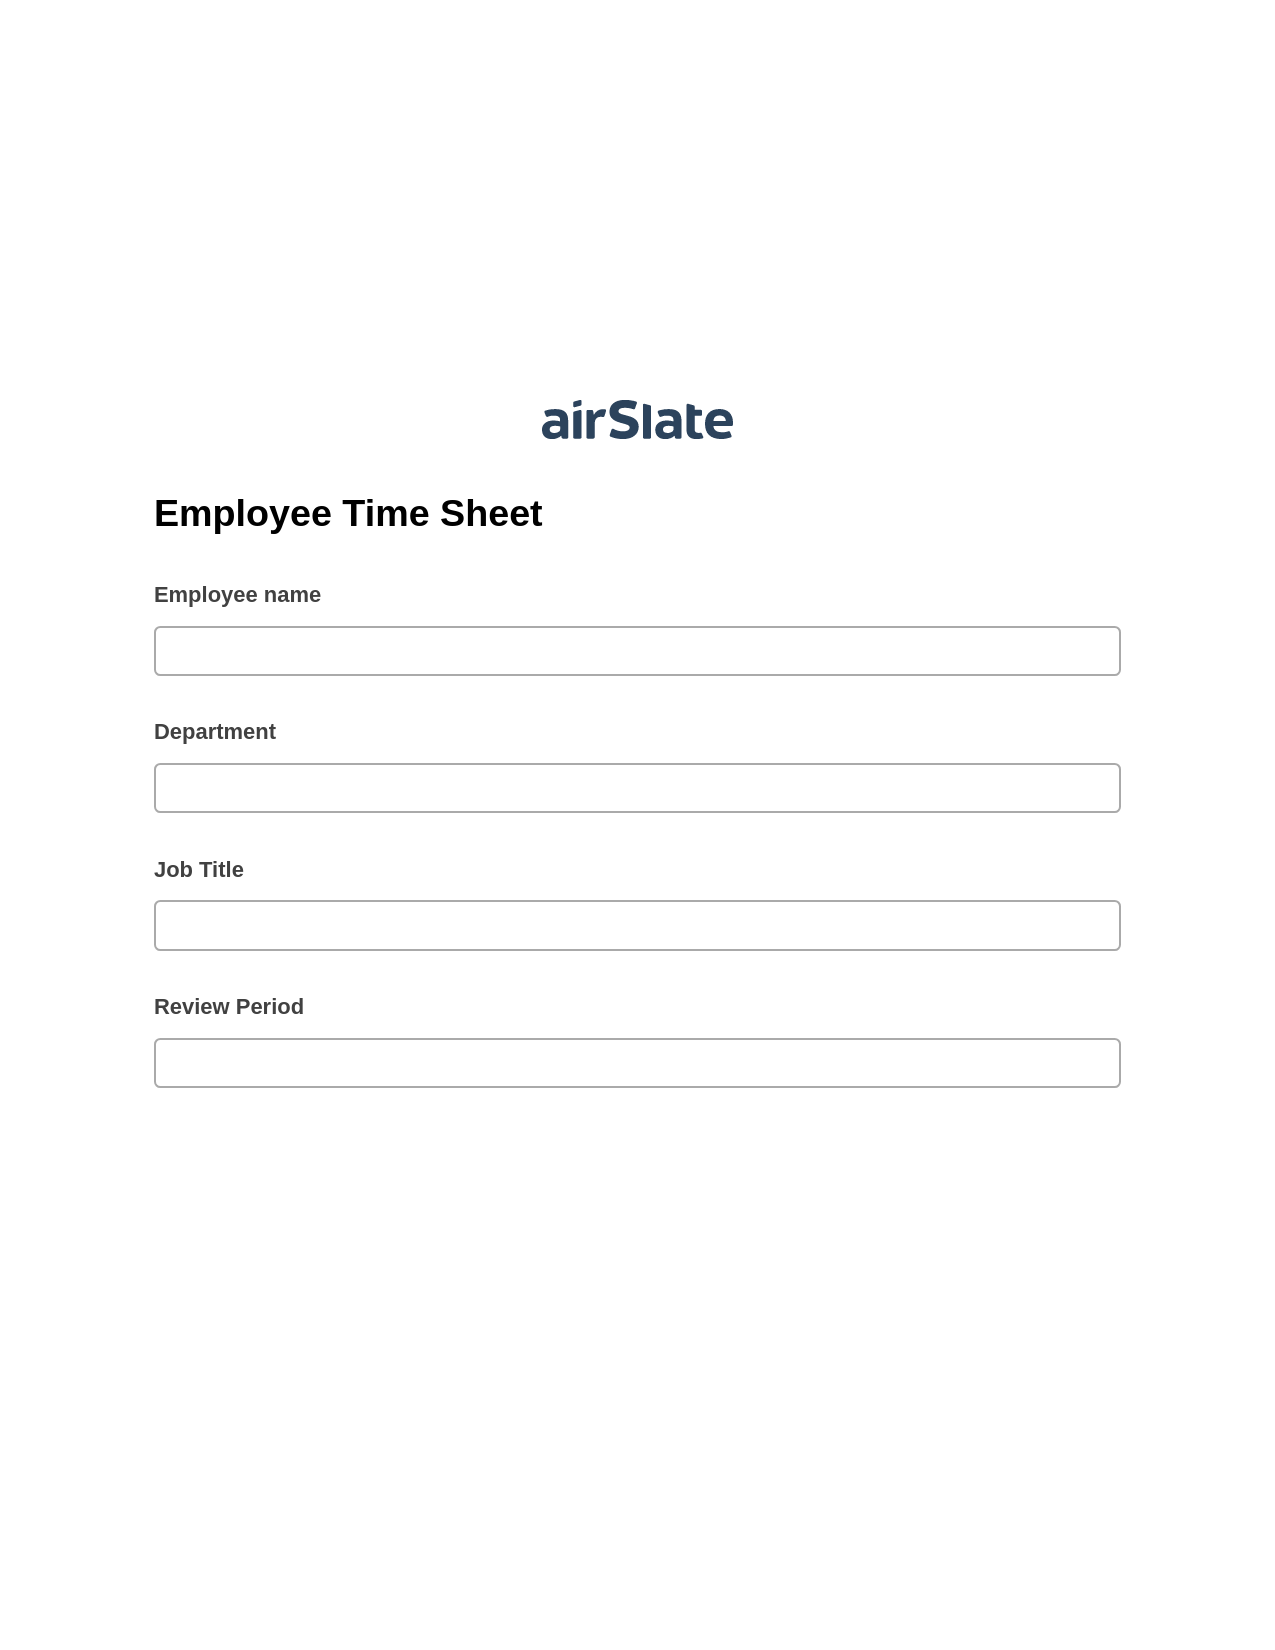 Employee Time Sheet Pre-fill Document Bot, Create slate from another Flow Bot, Archive to Dropbox Bot